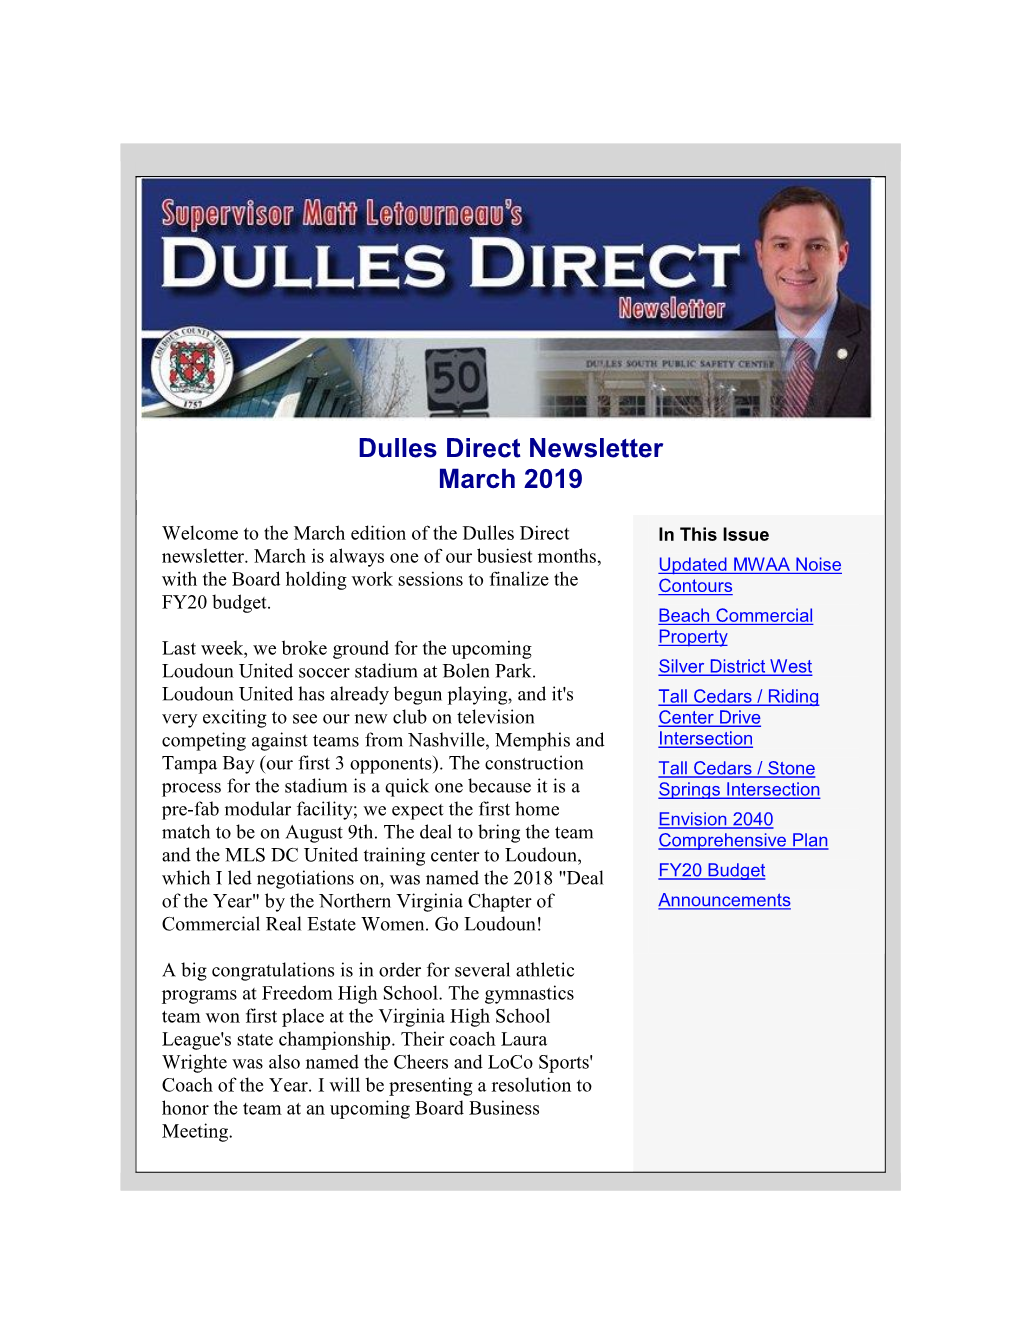 Dulles Direct Newsletter March 2019